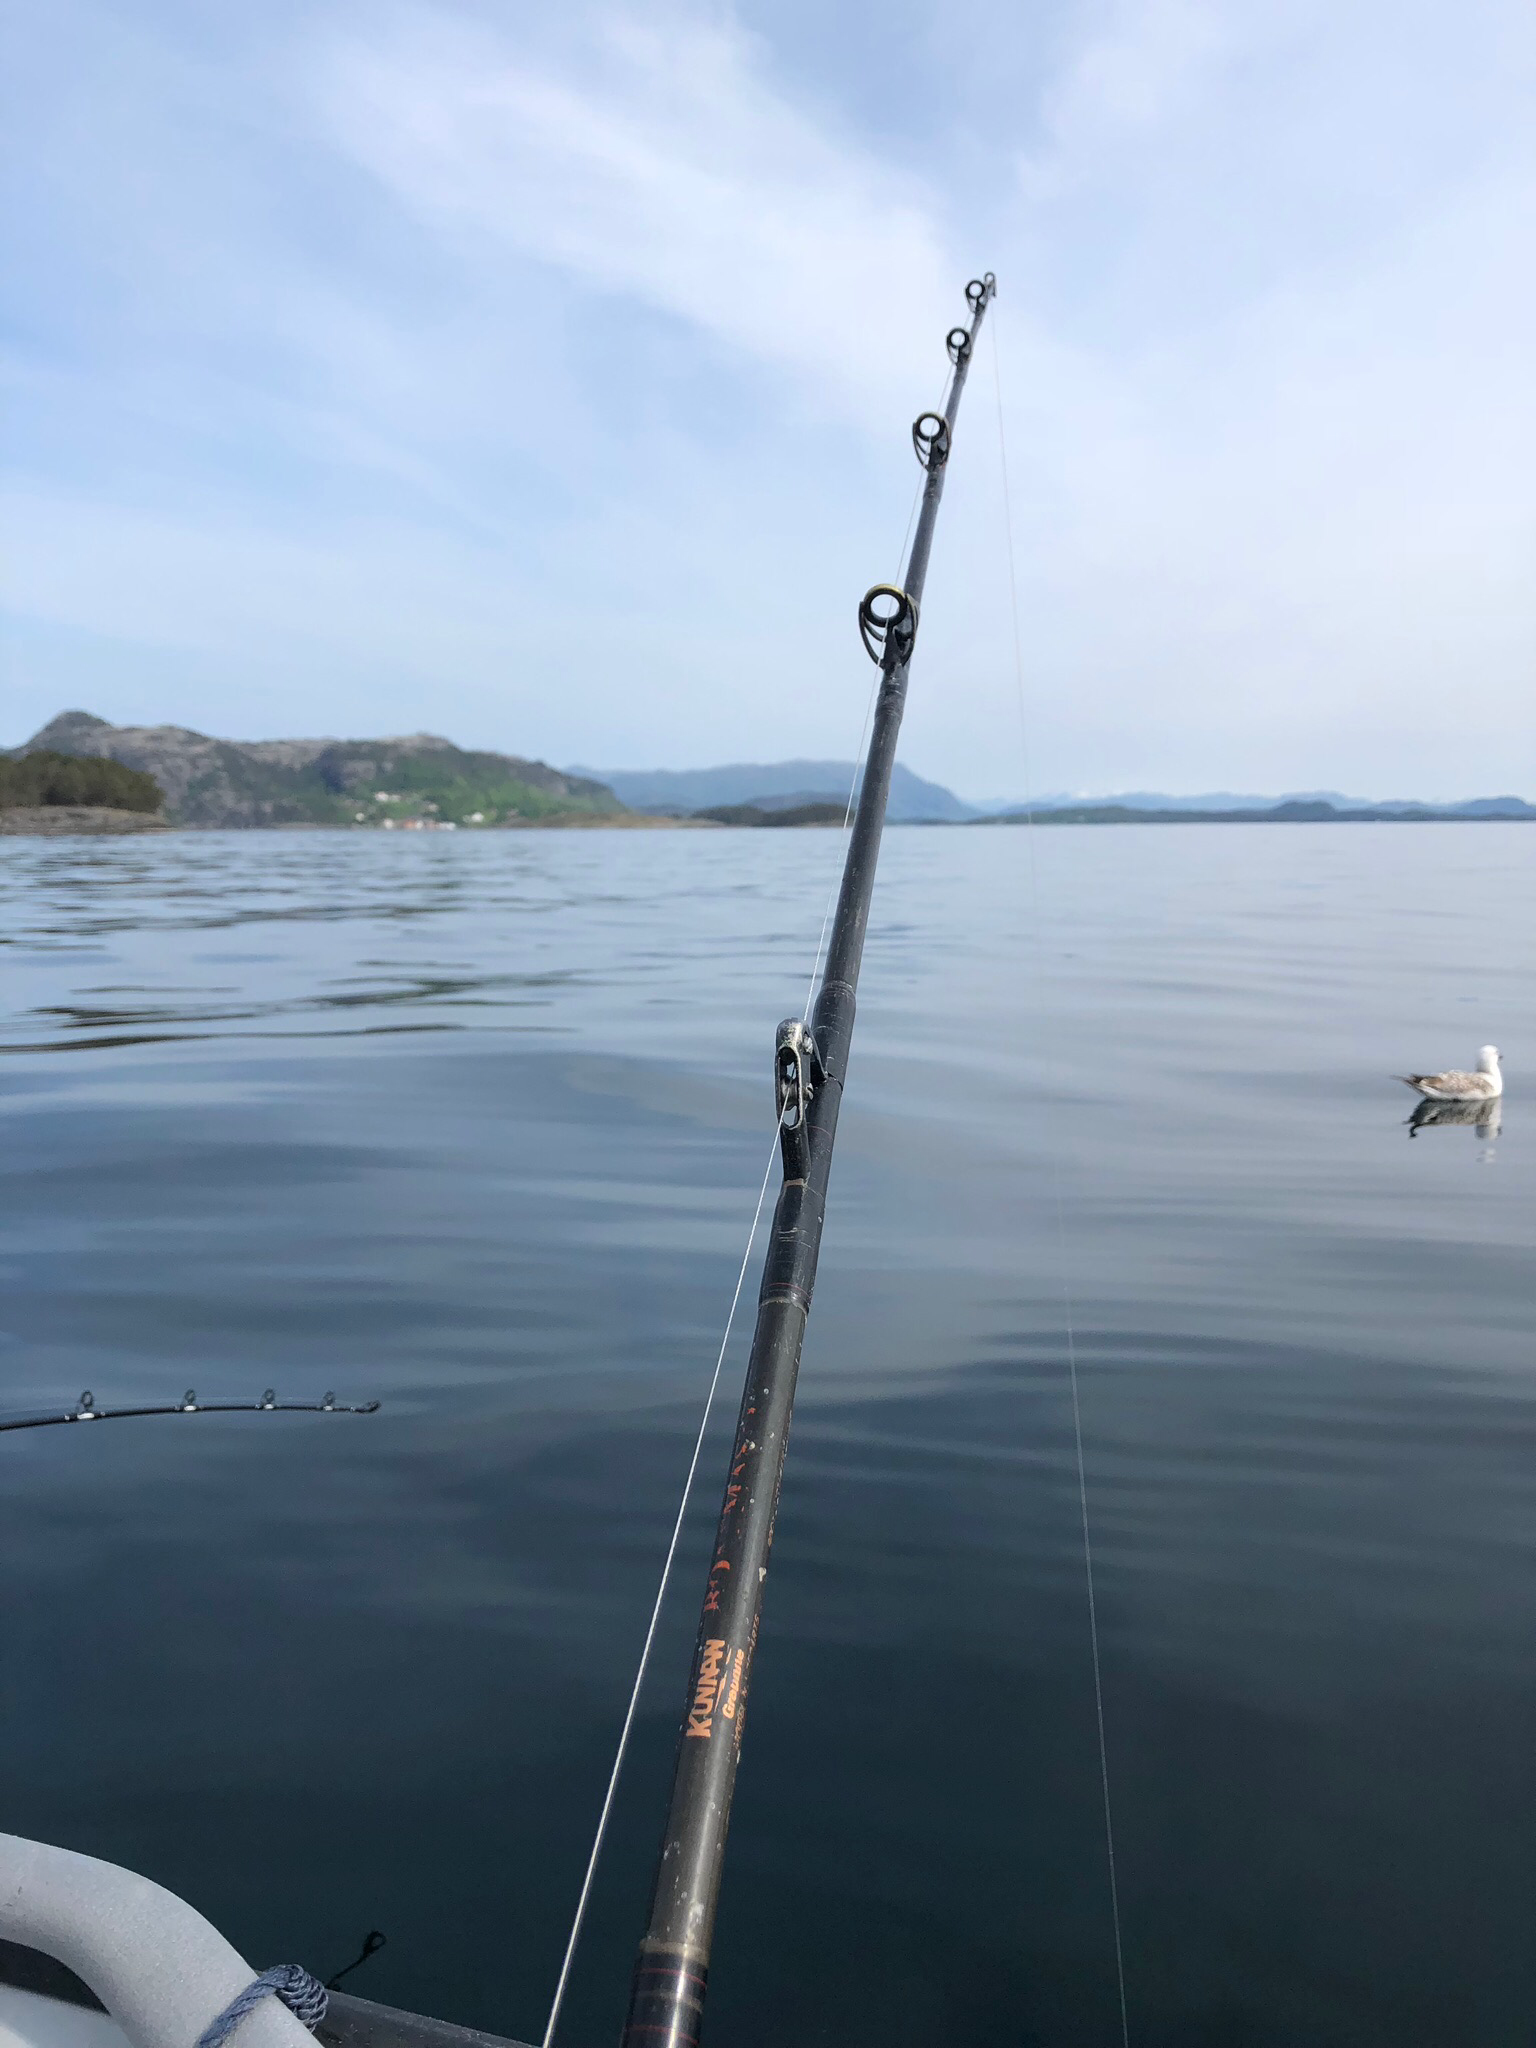 About fishing - My, Norway, Longpost, Fishing, Crab, Personal experience